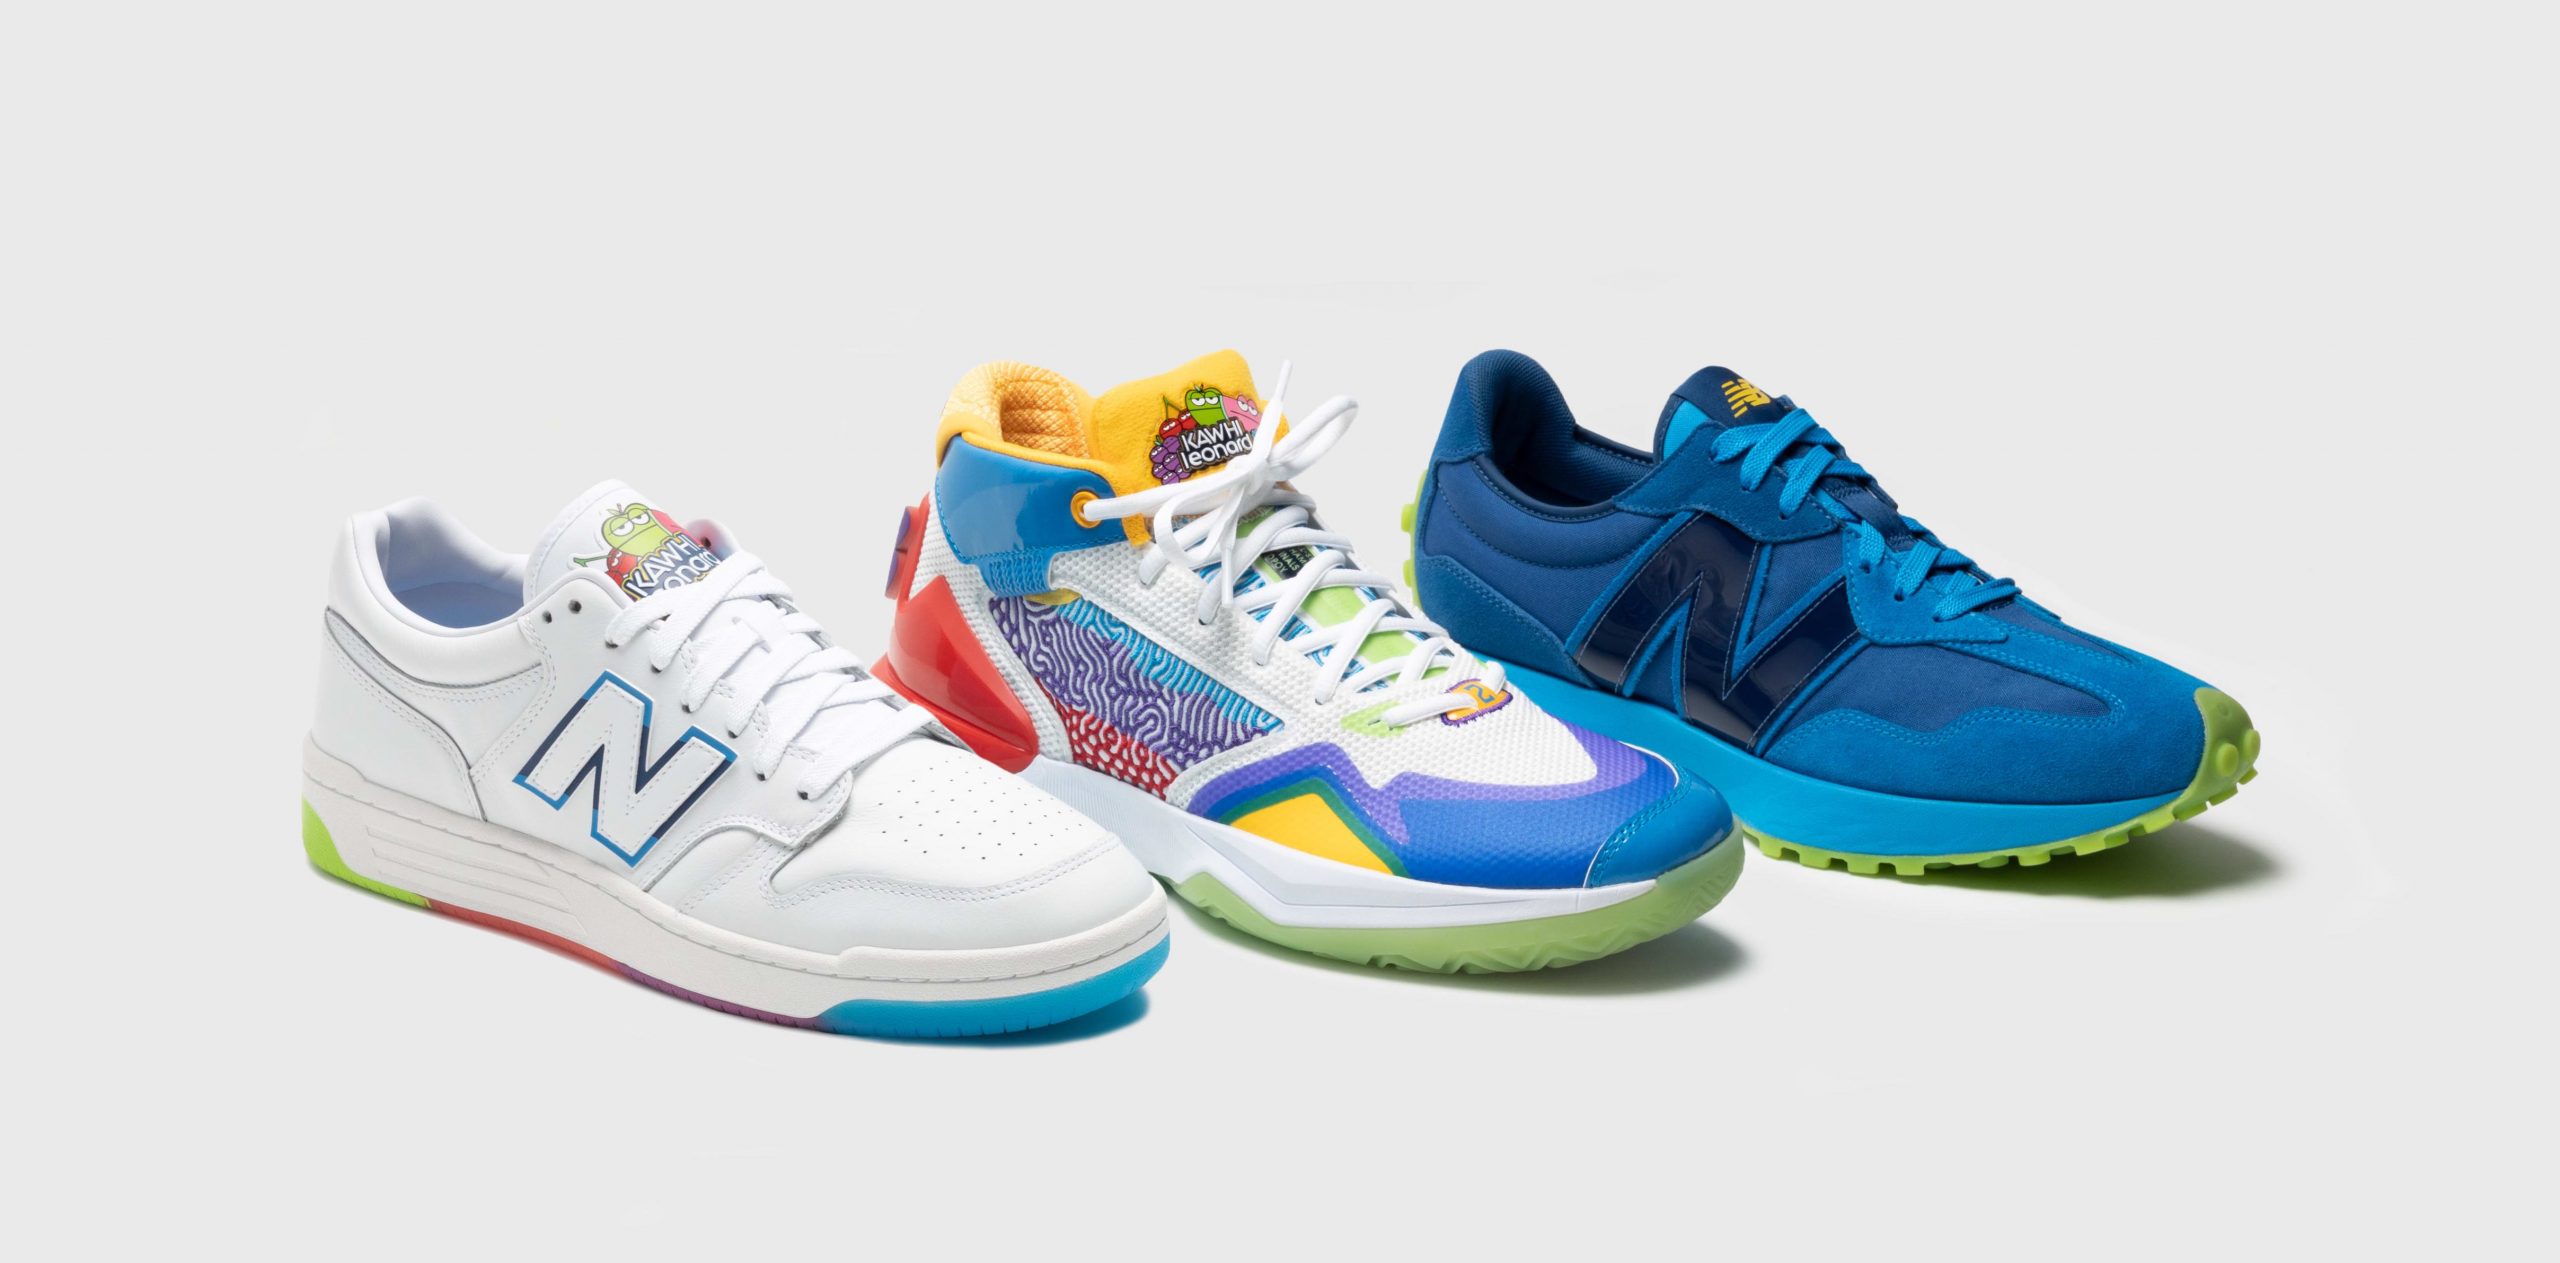 New Balance Releases Jolly Rancher Shoe 